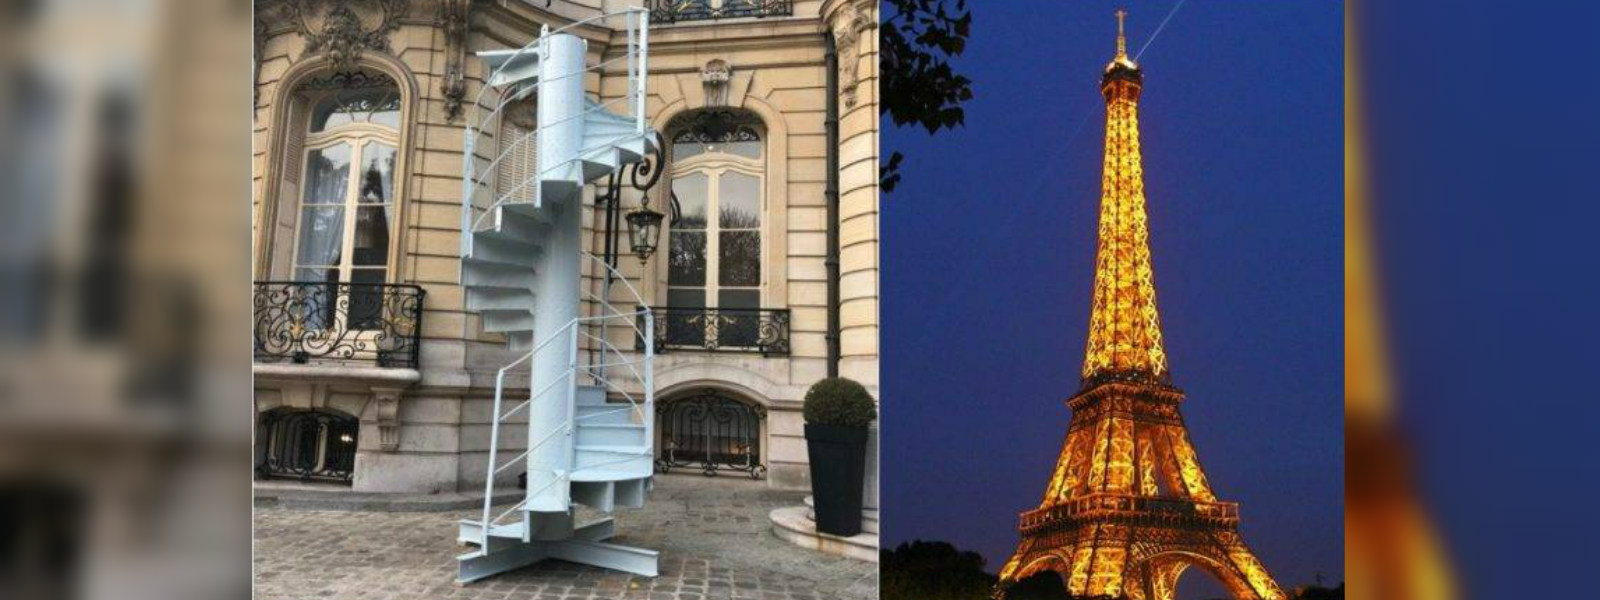 Piece of Eiffel Tower staircase sells in auction